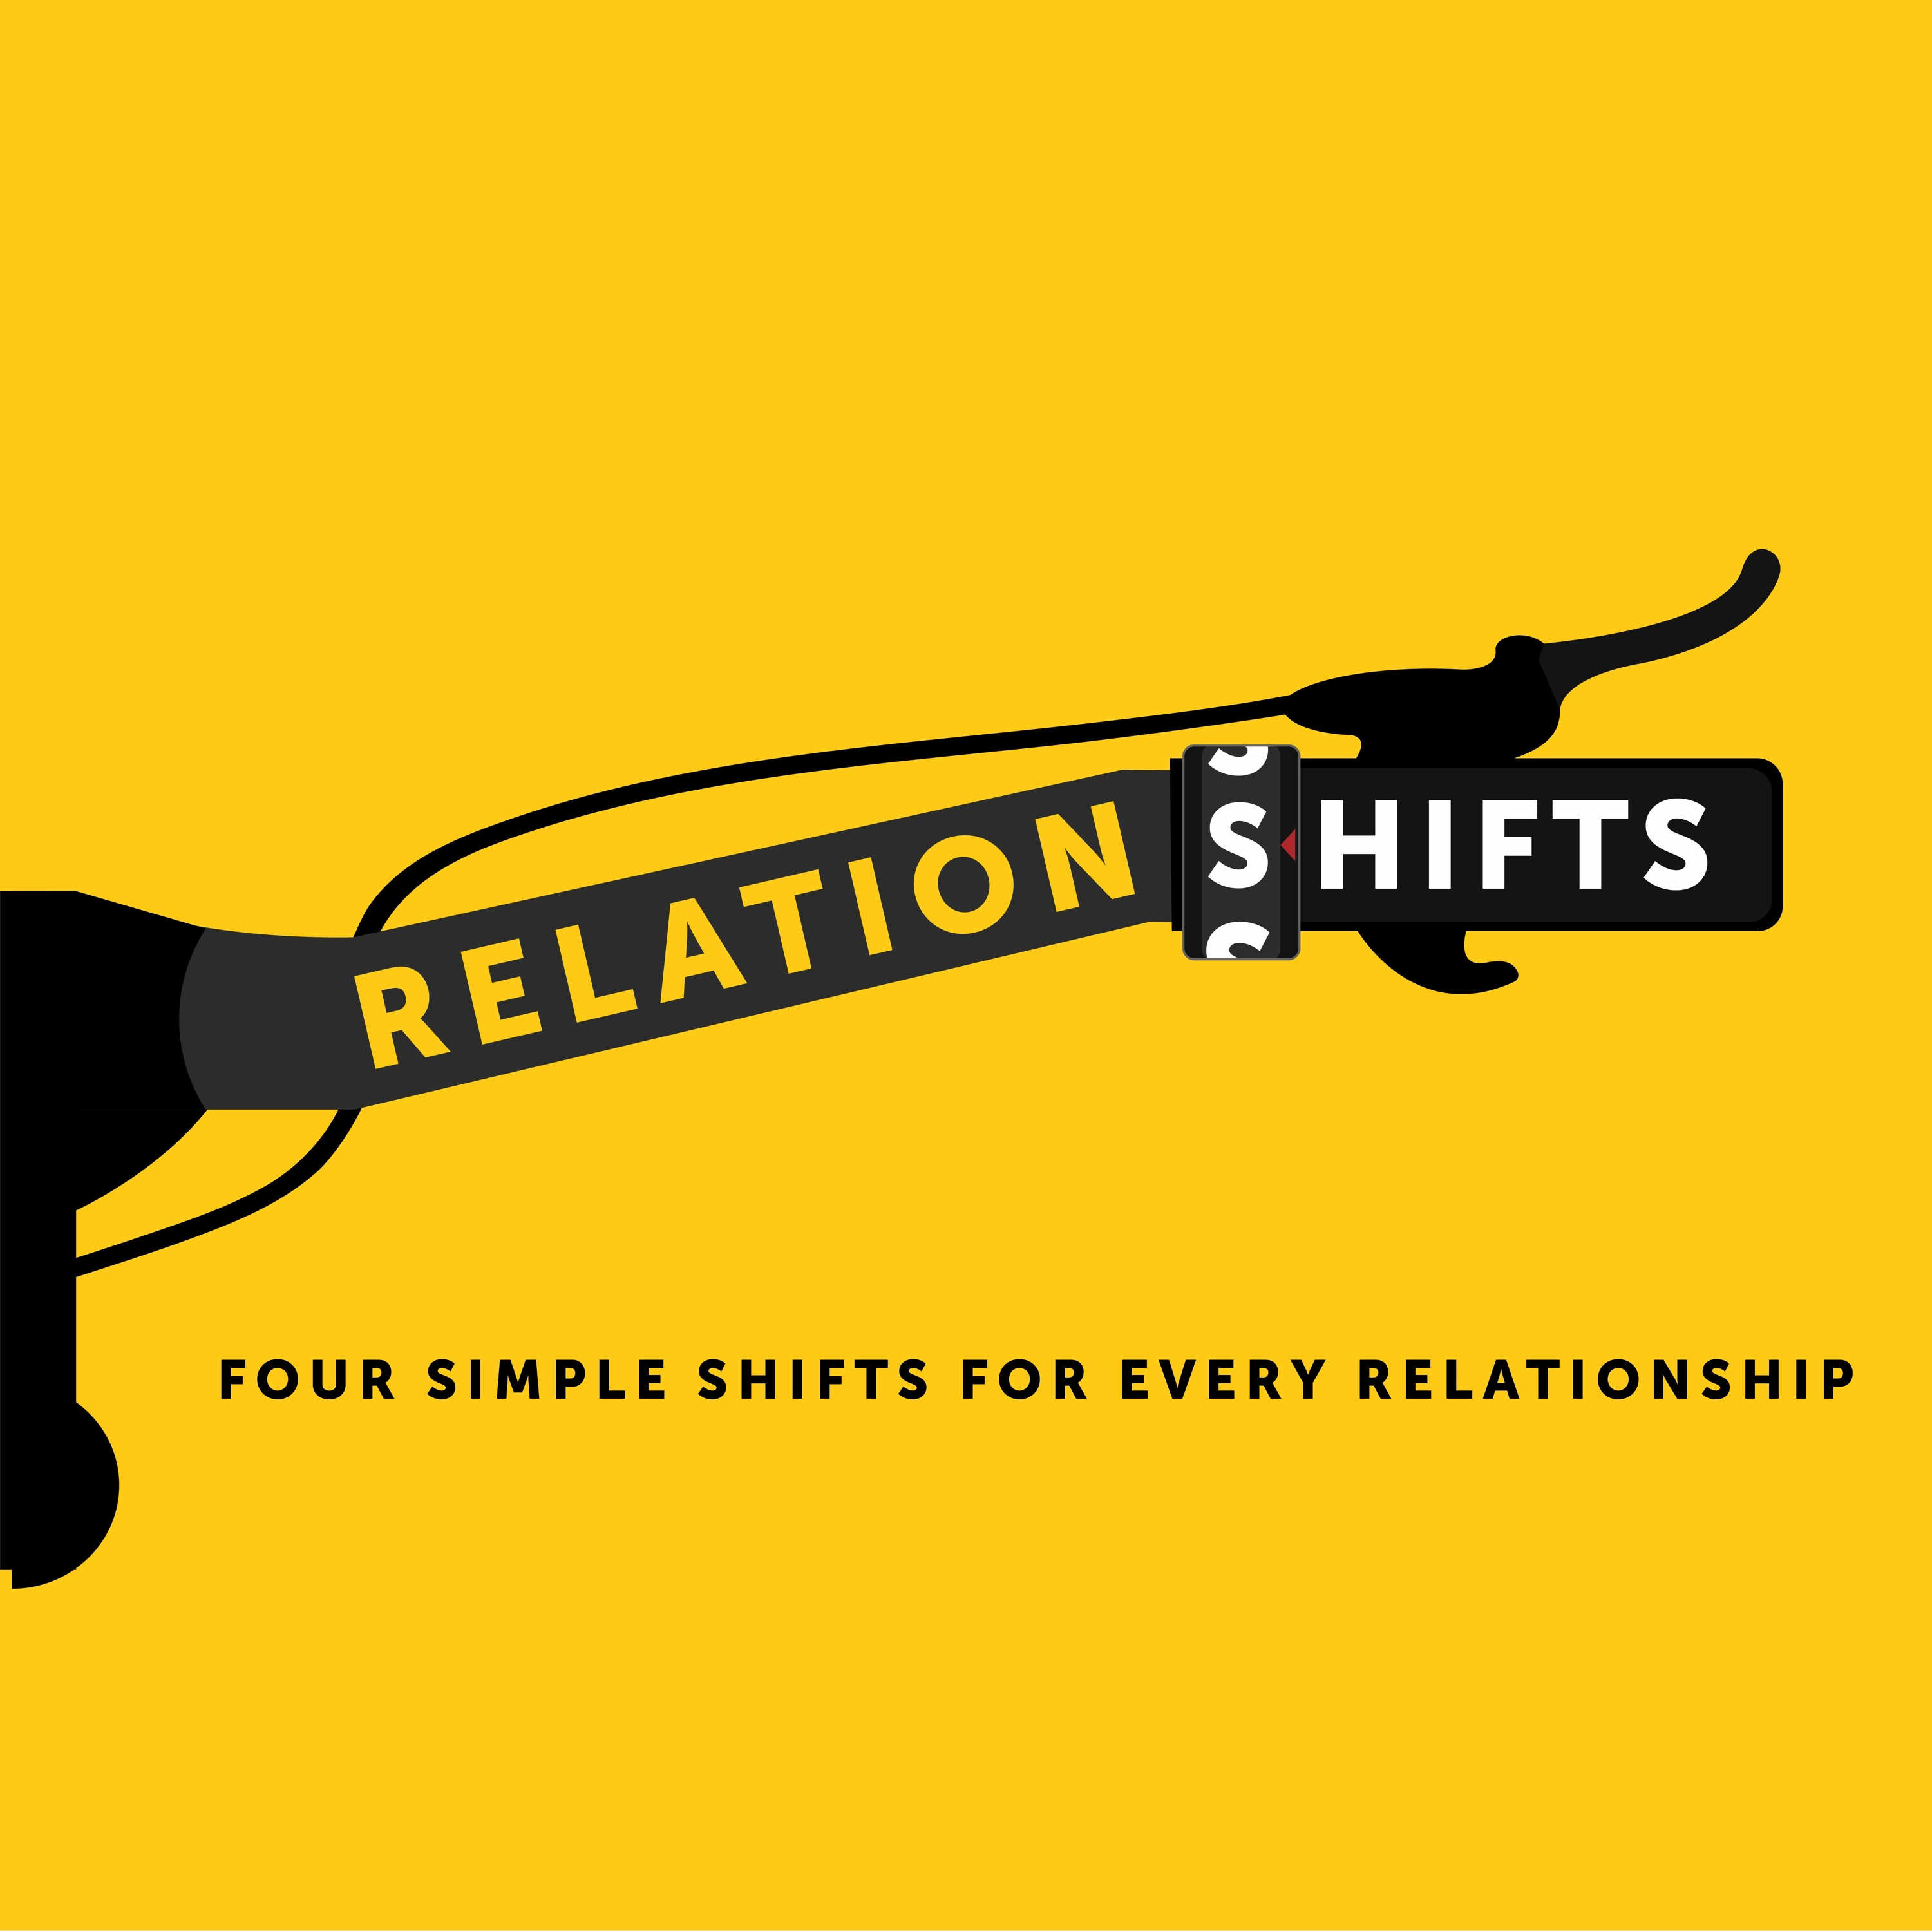 Burden to Blessing | RelationShifts | Ethan Magness